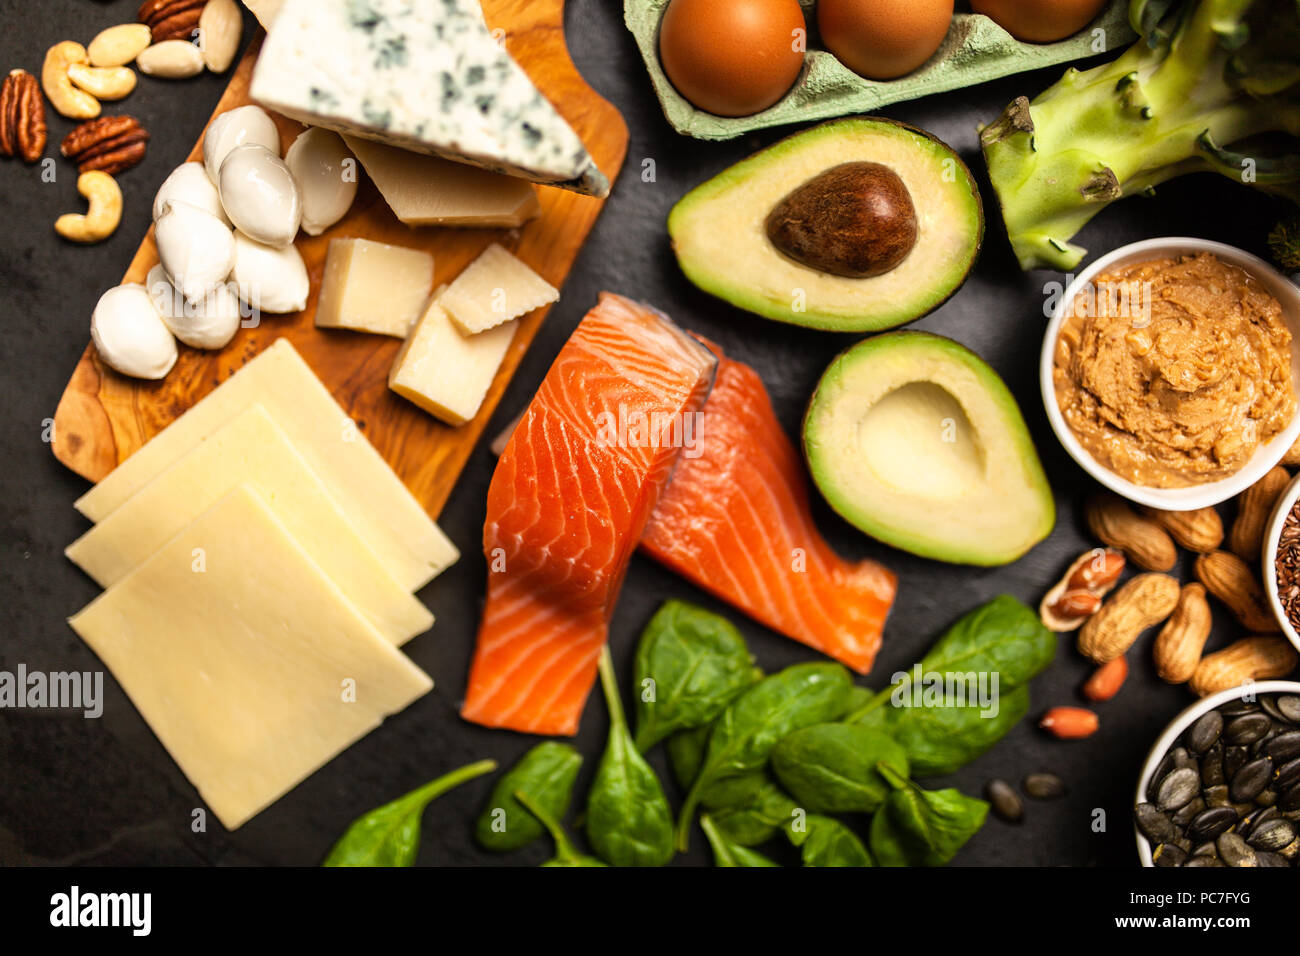 Ketogenic diet concept - low carb healthy food Stock Photo